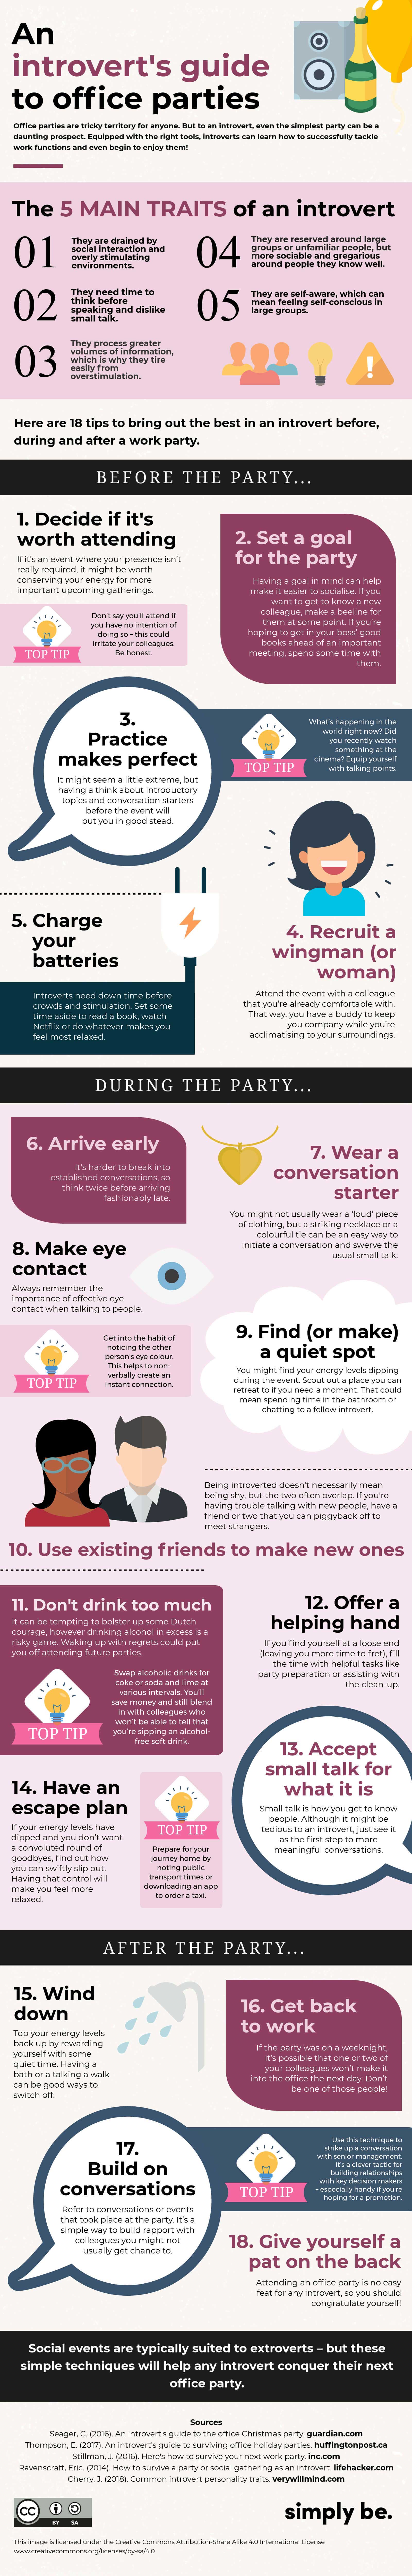 An introvert’s guide to office parties